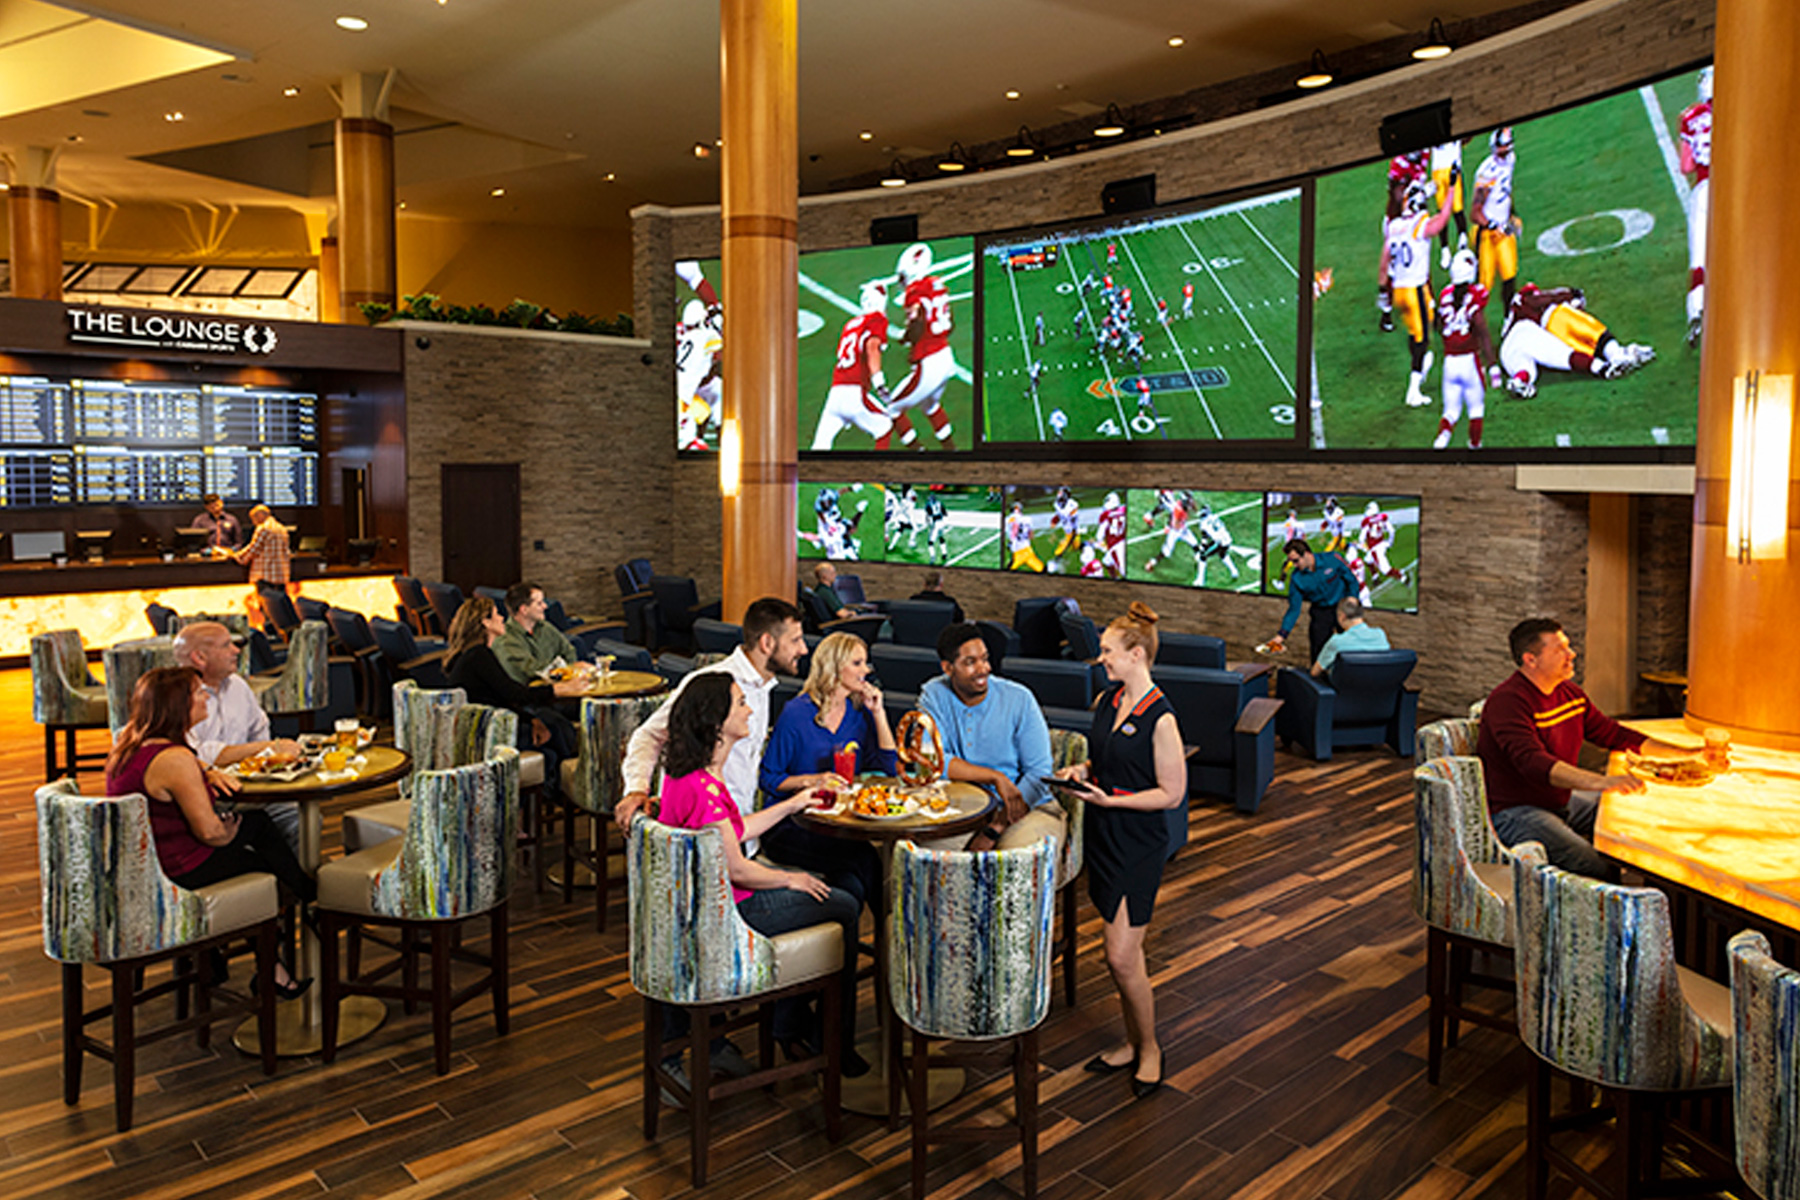 A crowd enjoying appetizers at The Lounge Sportsbook in Verona, NY